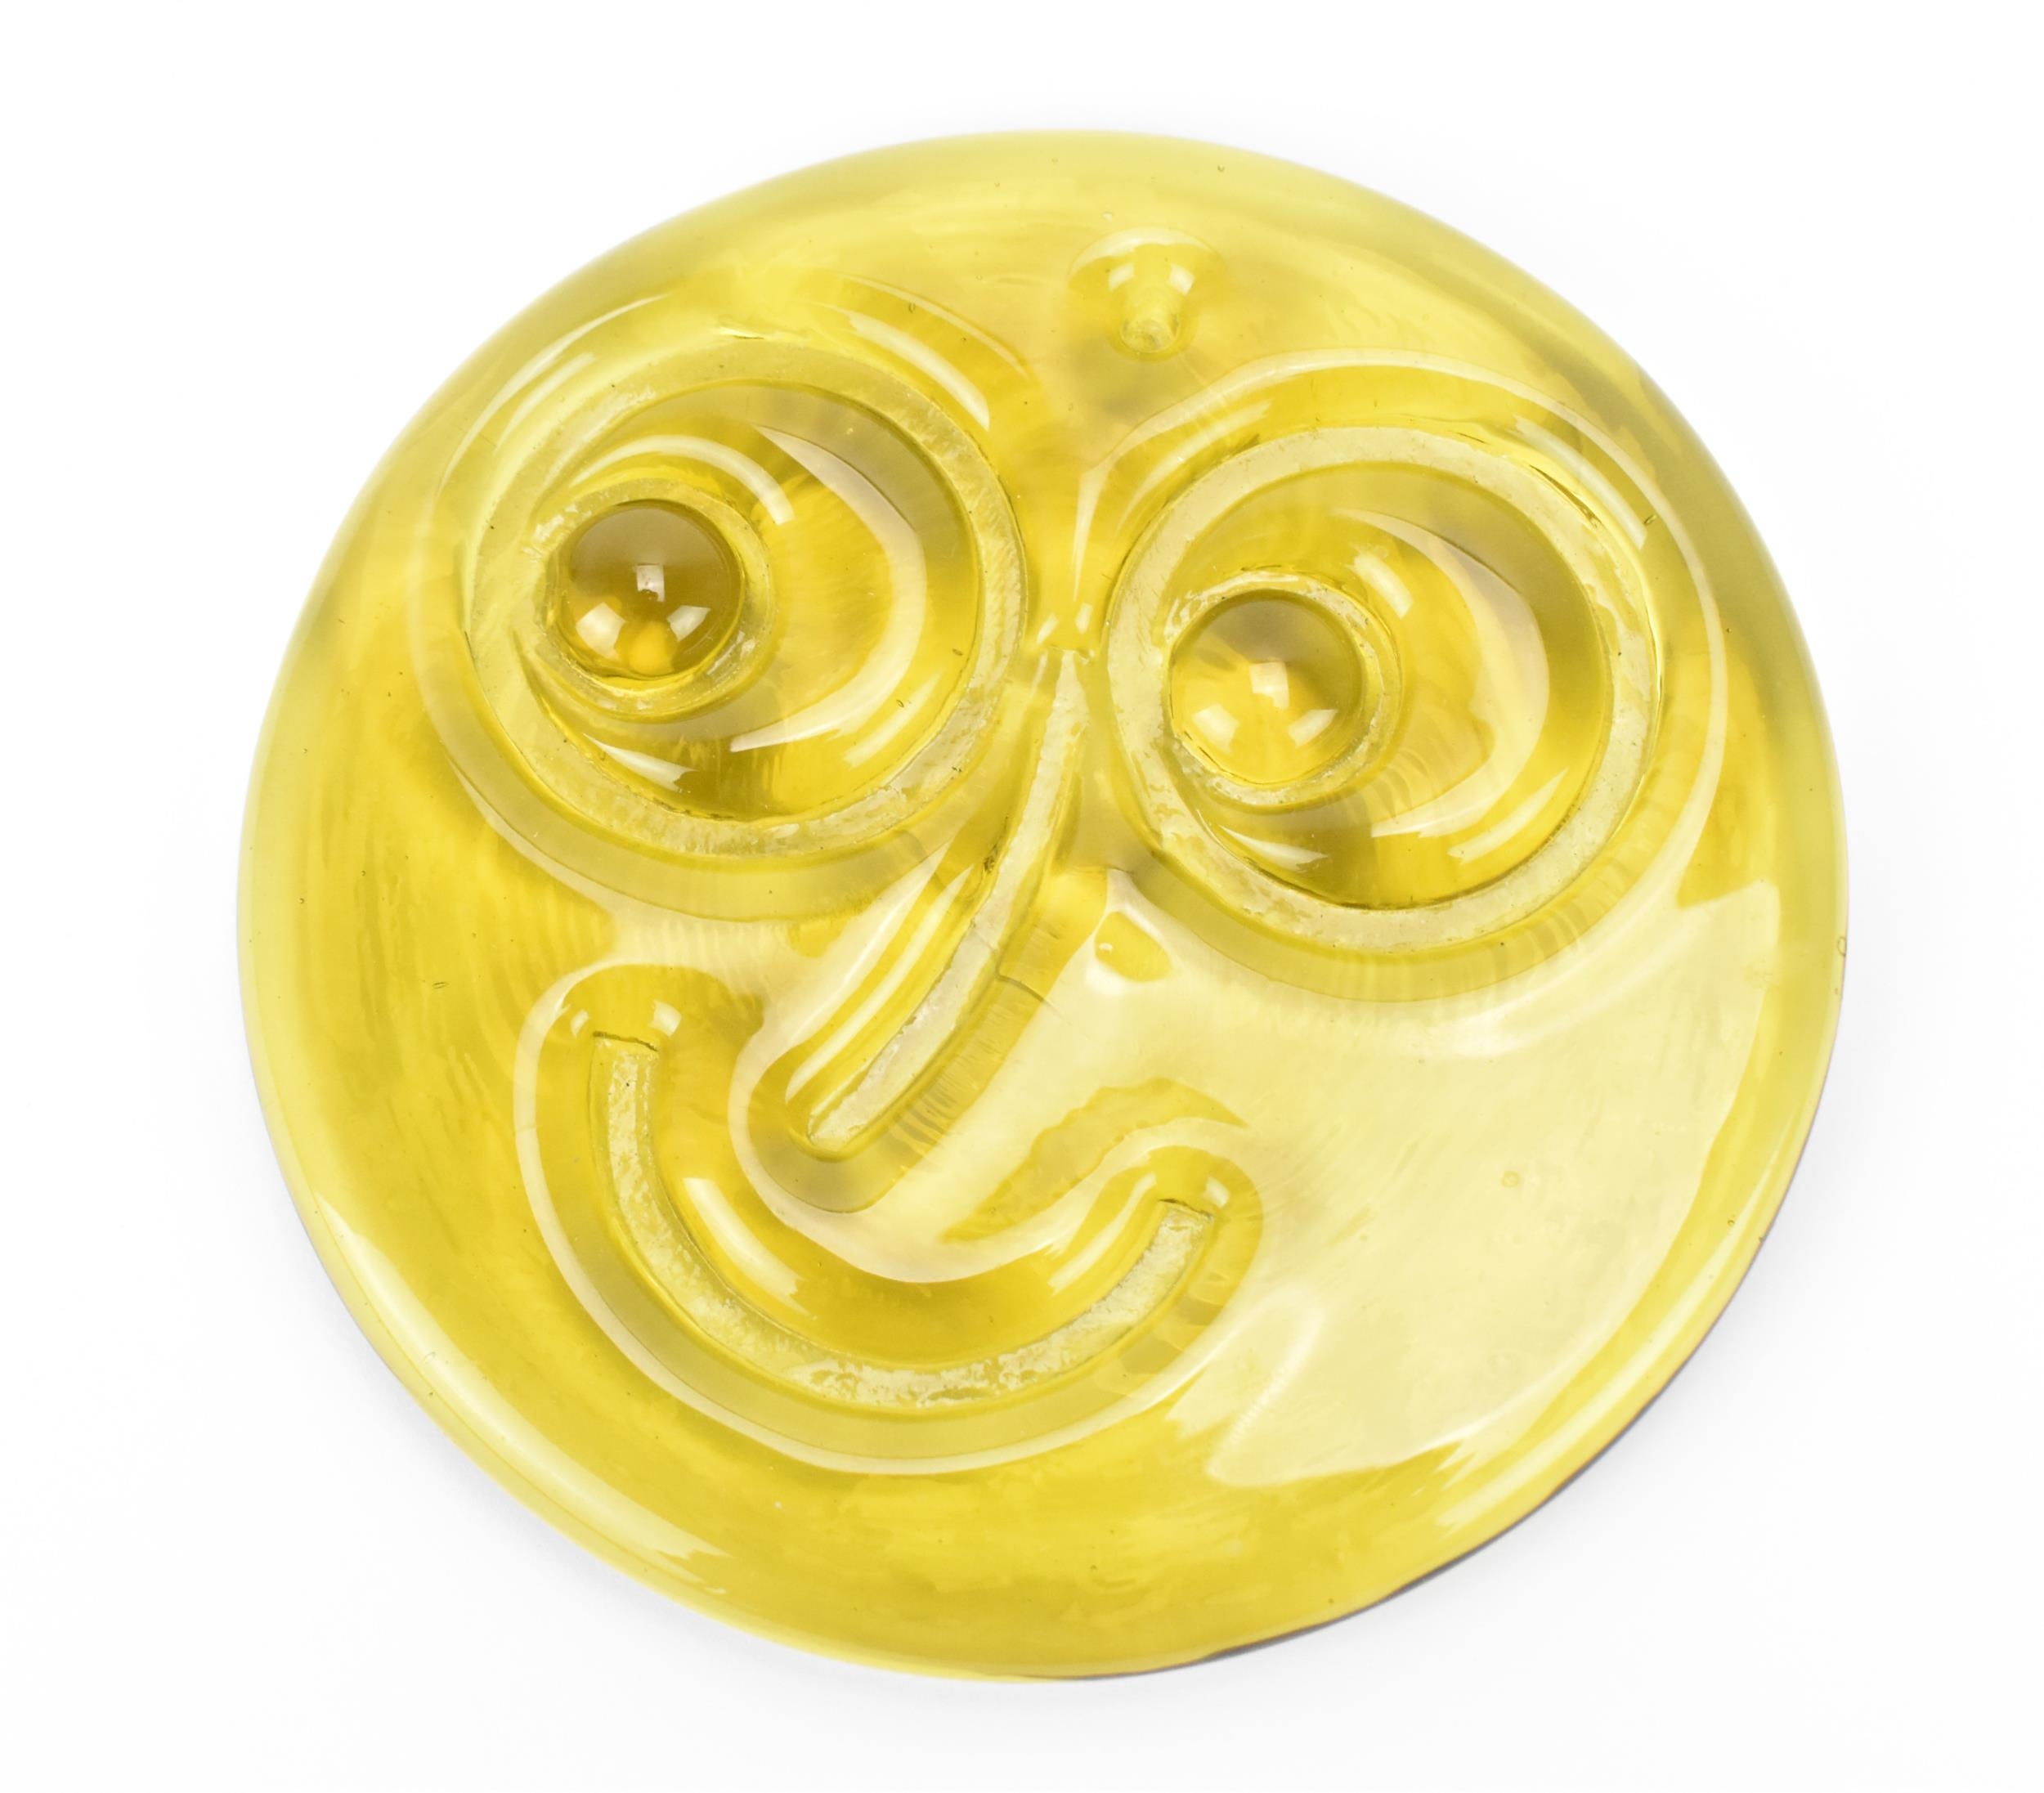 A rare Whitefriars glass smiley face suncatcher, designed by Alfred Fisher, in translucent yellow